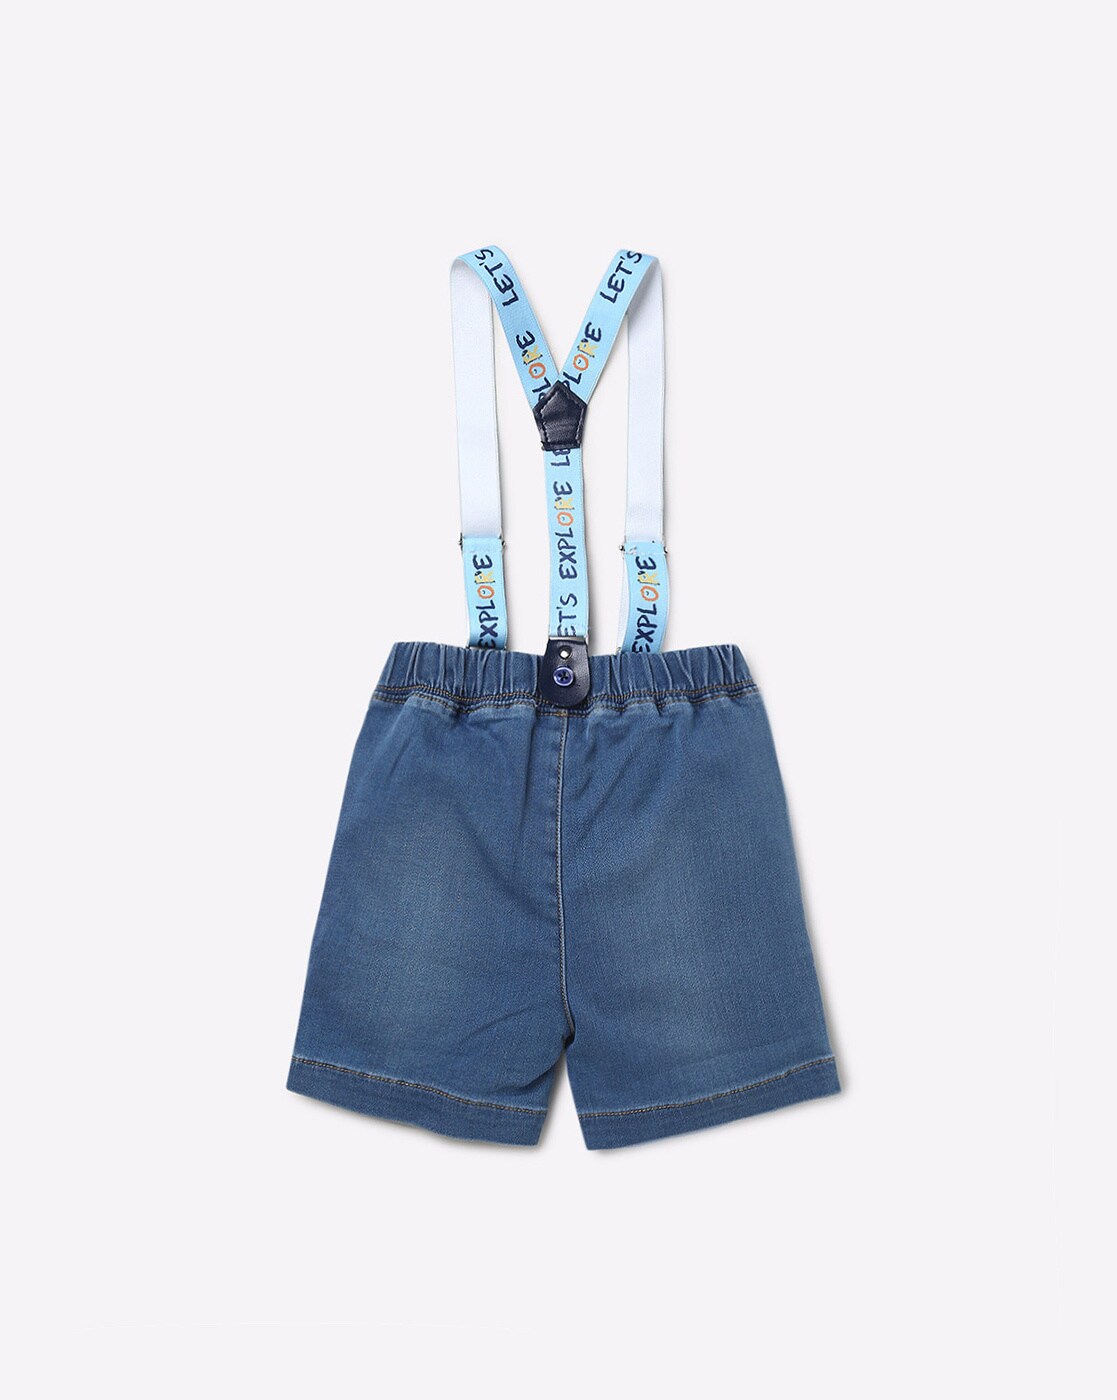 K-D Grey Shorts with Suspenders Size 6 – Kids Warehouse AU